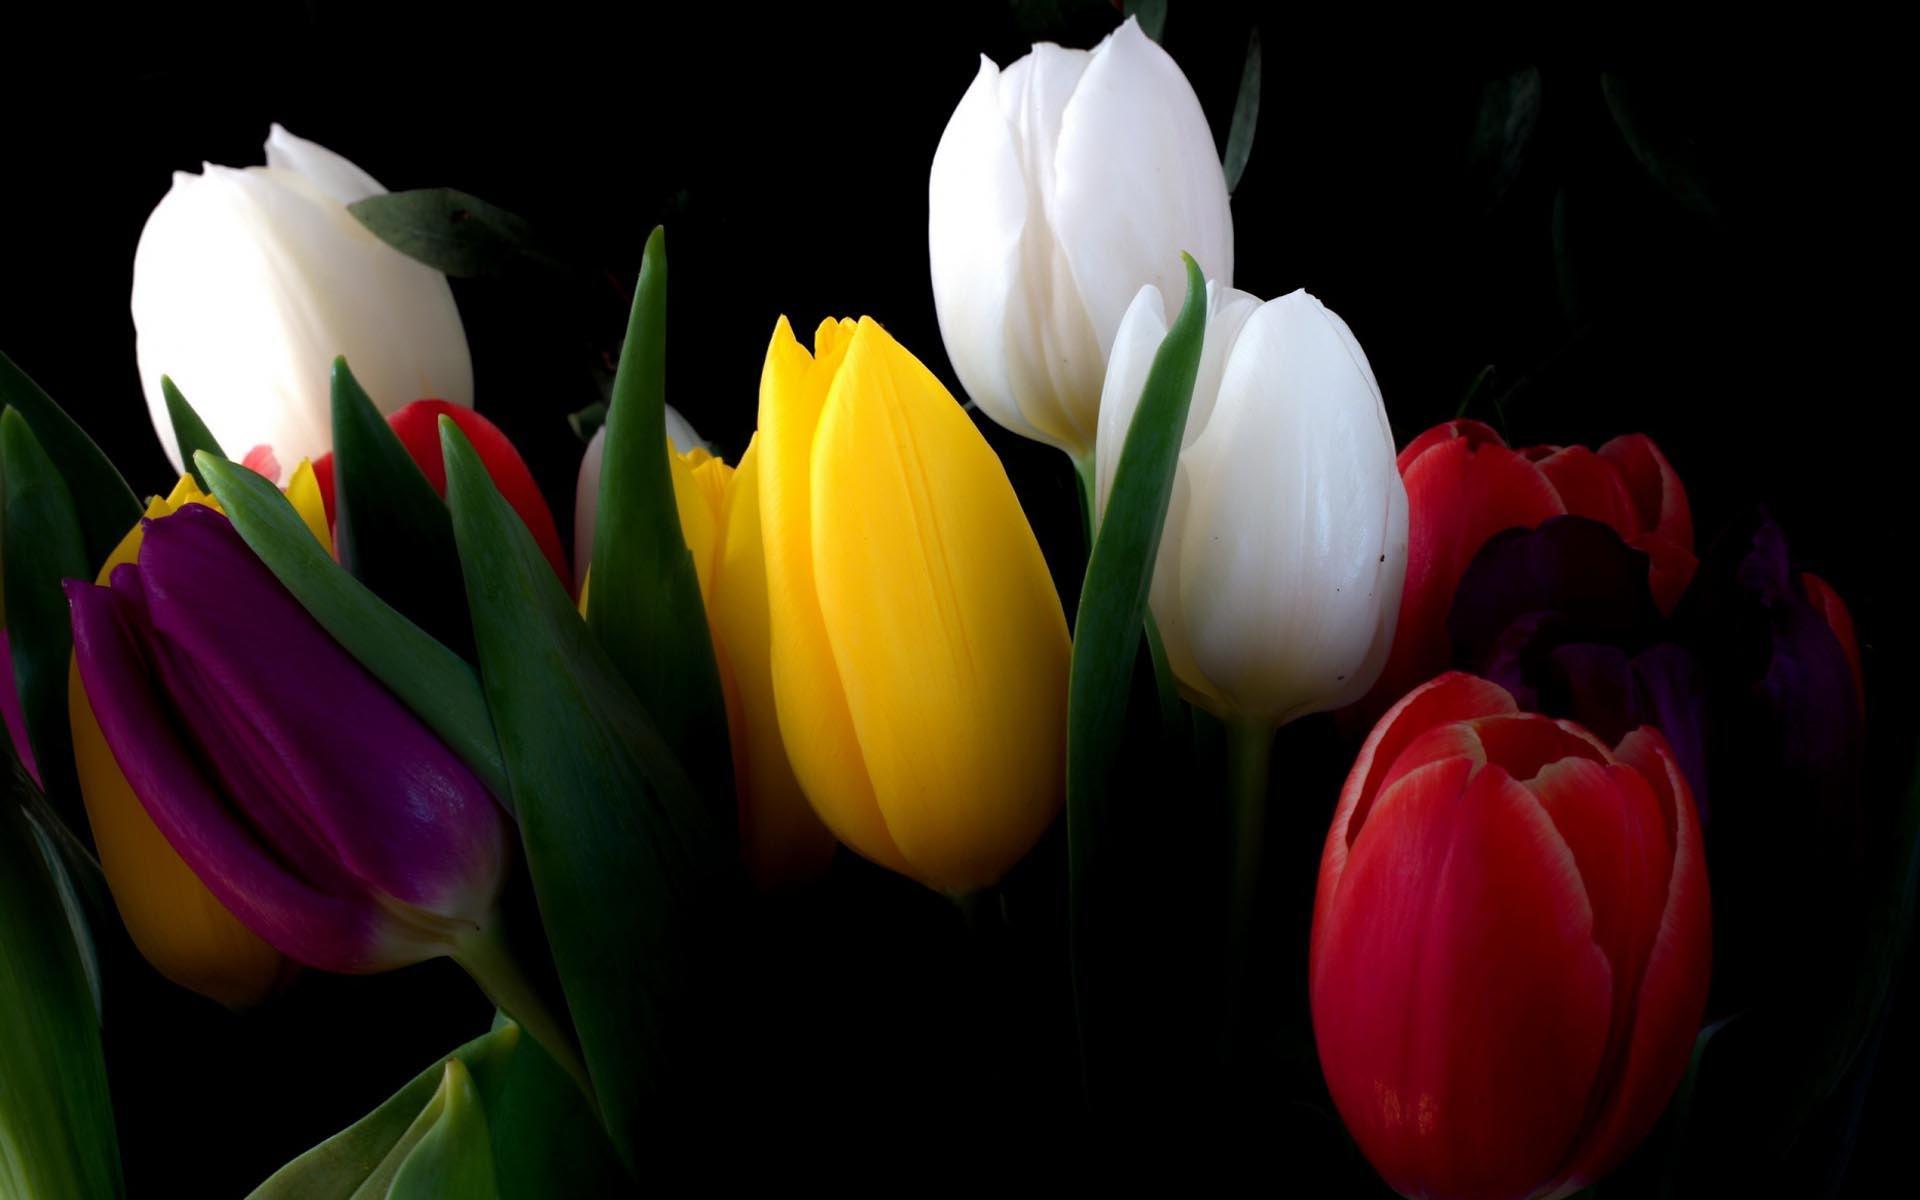 Wallpaper For > Wallpaper Of Flowers With Black Background